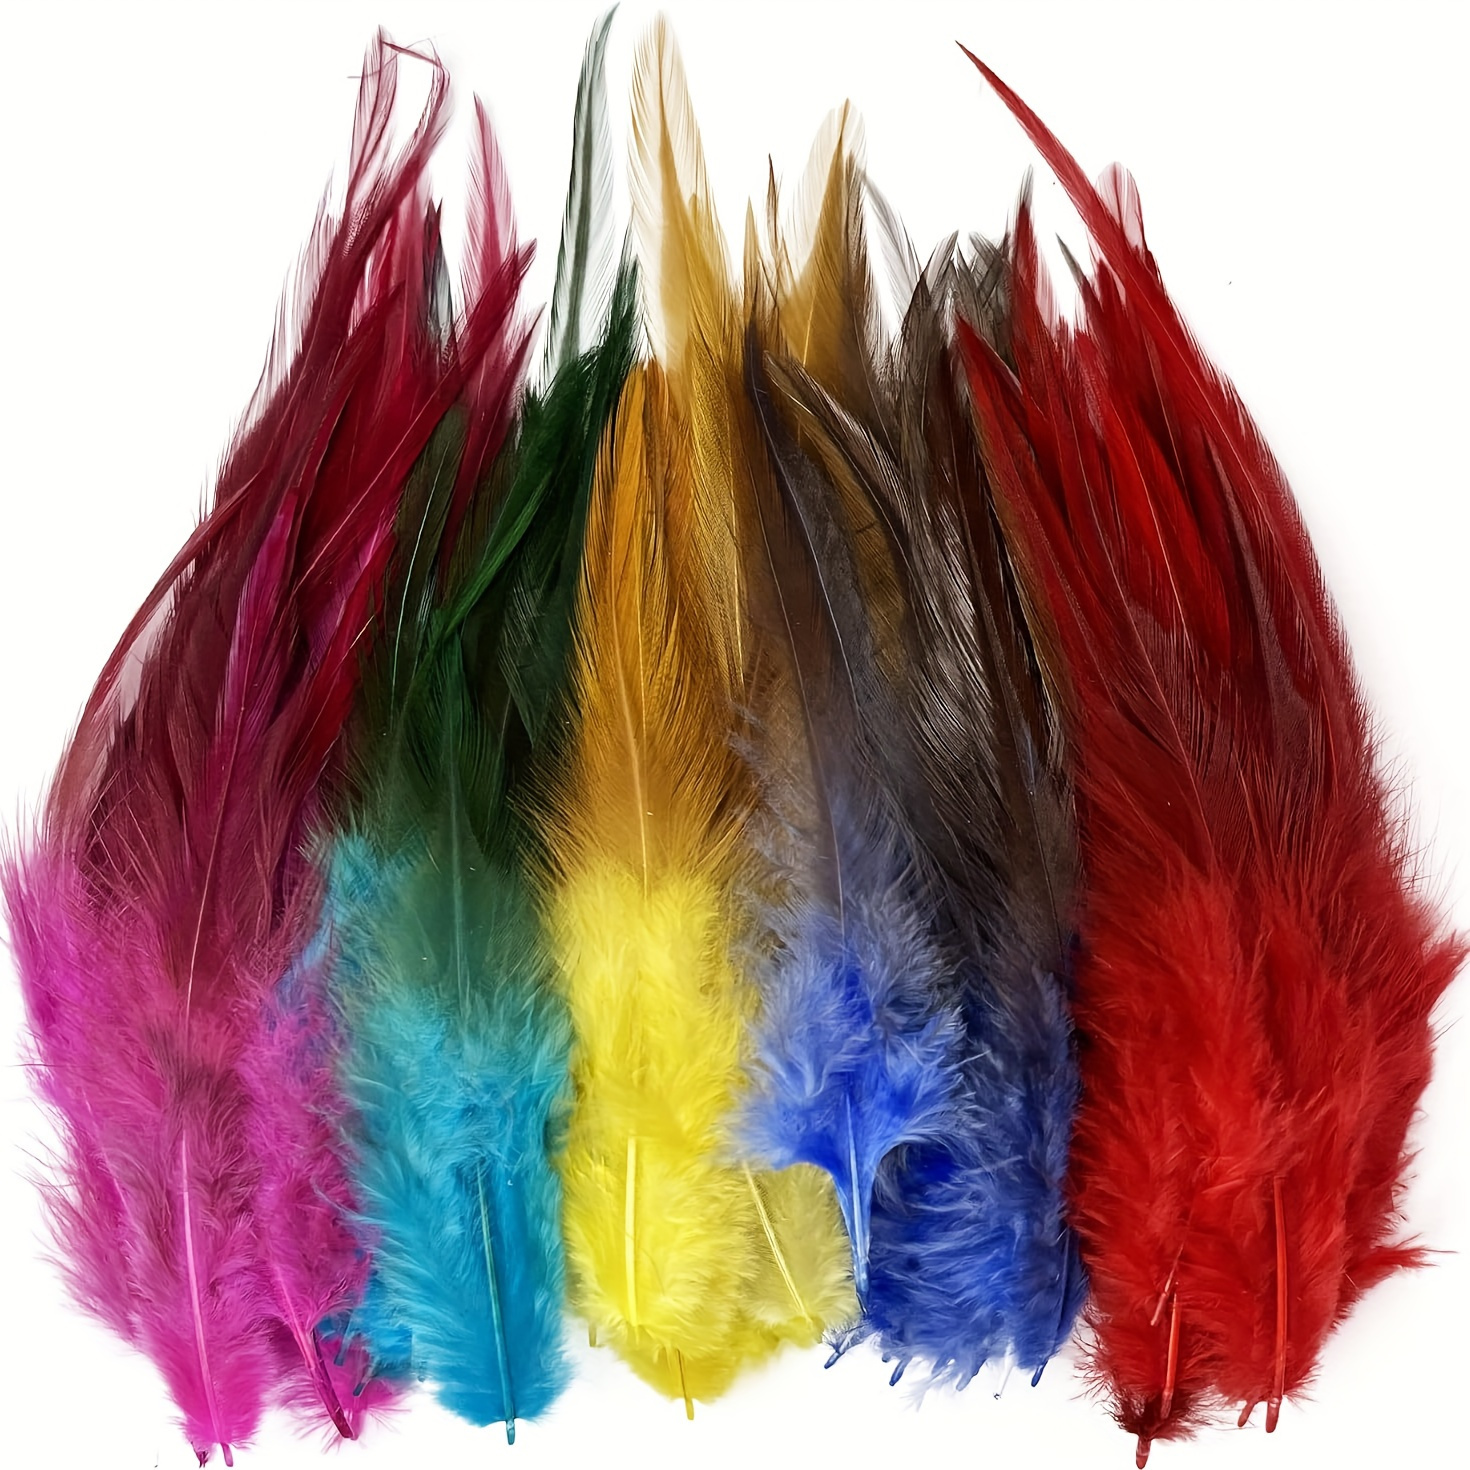 100pcs 4-6 Black Feathers for Crafts and Dreamcatcher Making Fringe Trim  and DIY Projects Colored Feathers Material black 100Pcs